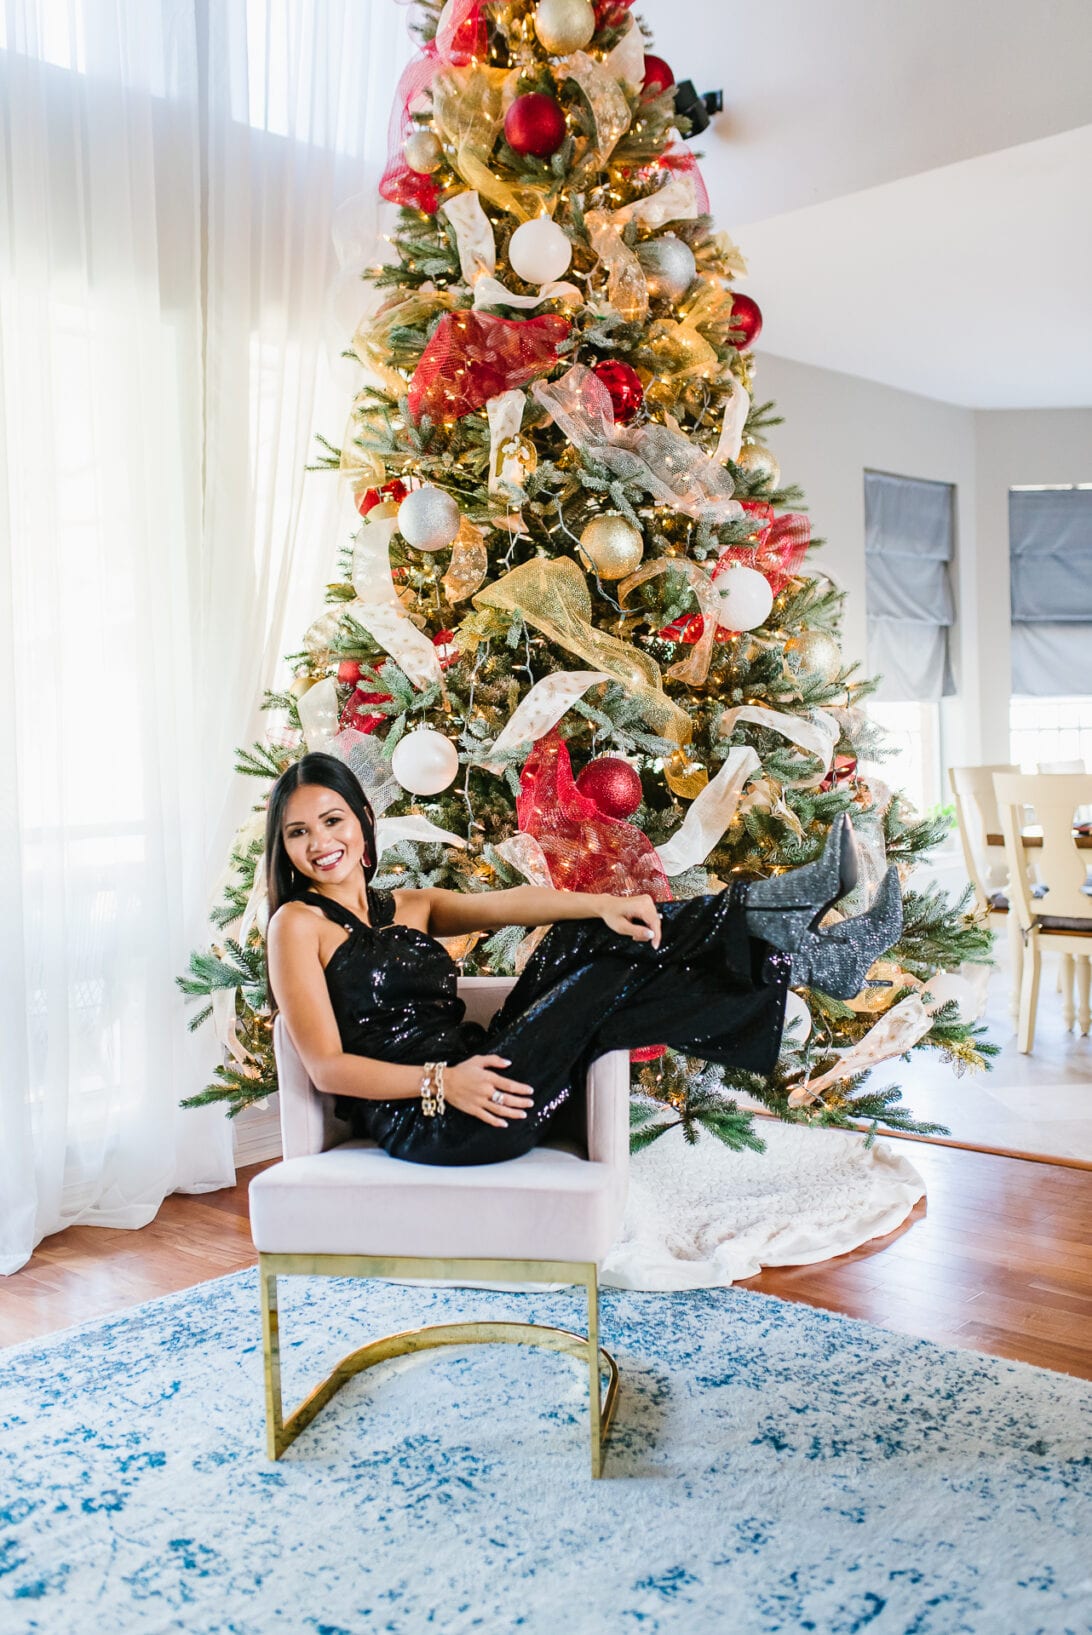 Christmas card photo, Christmas tree photography, sequin boots, glittery boots 